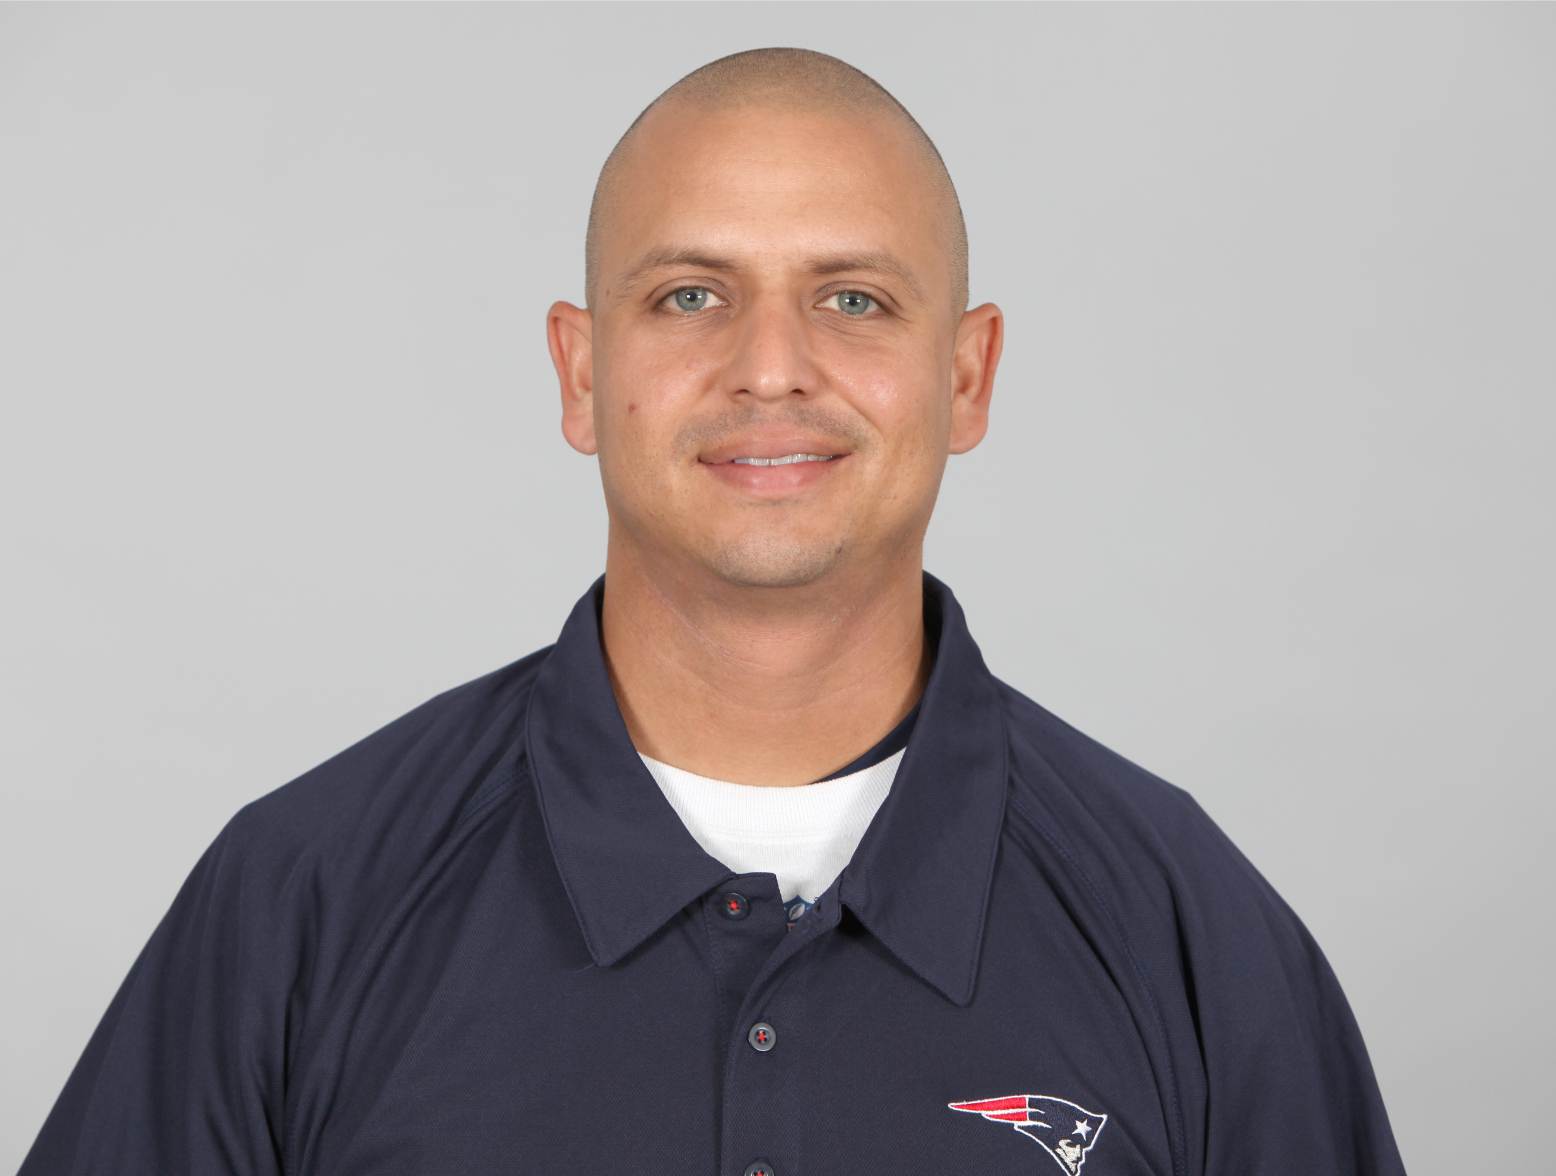 Moses Cabrera of the New England Patriots poses for his NFL headshot circa 2011 in Foxborough, Massachusetts. (Photo by NFL via Getty Images)